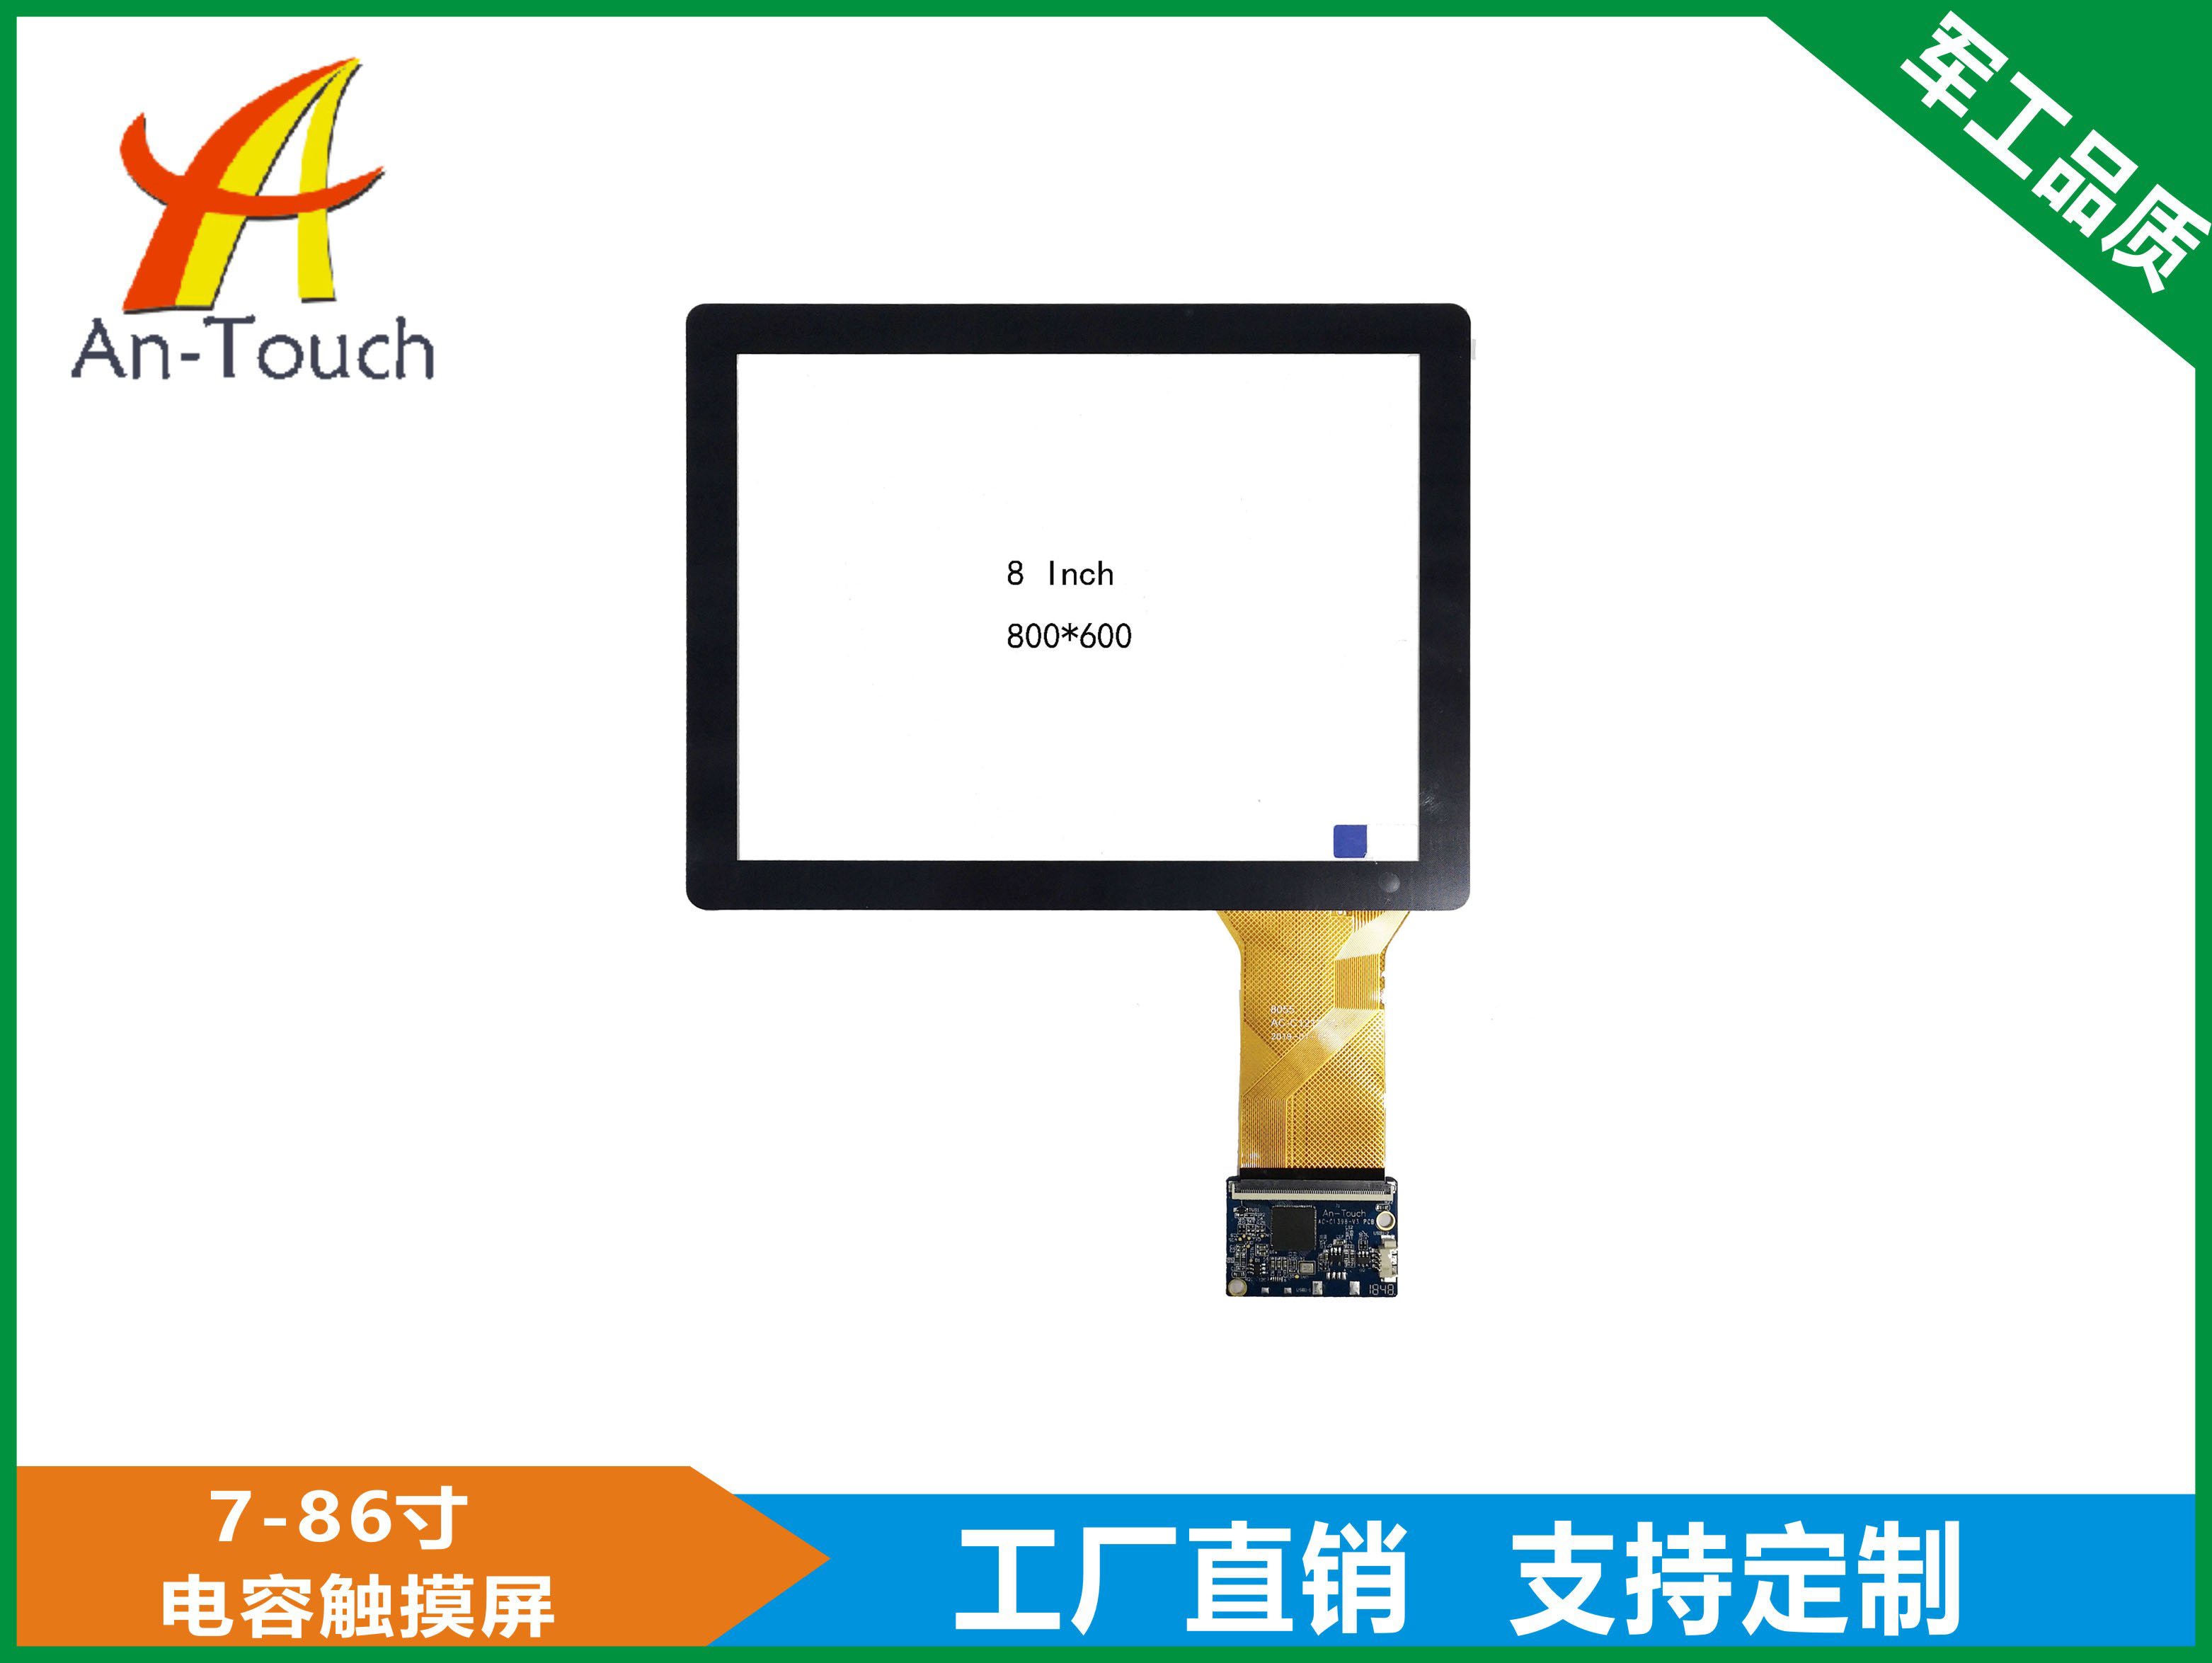 8.0 inch capacitive touch screen